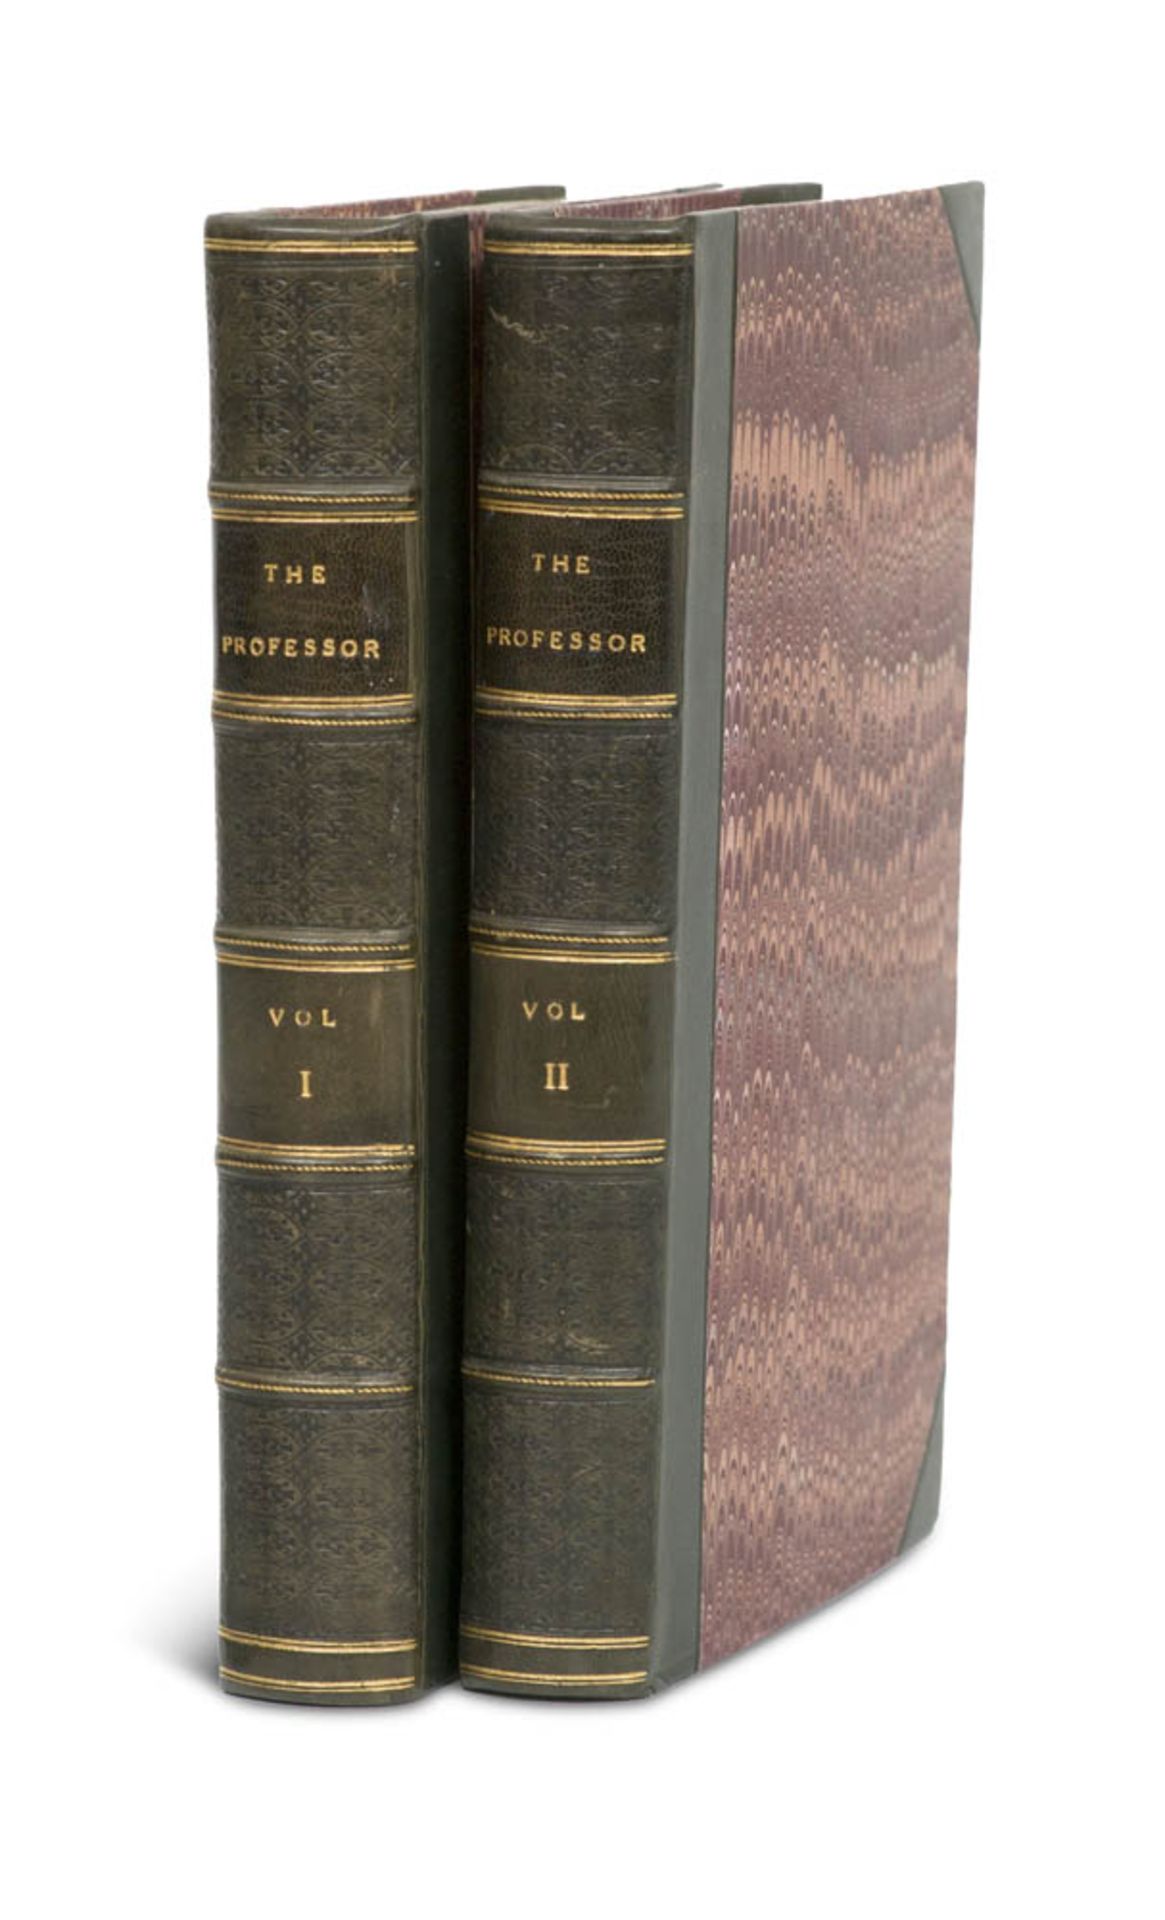 Bronte, Charlotte. The Professor. A tale by Currer Bell (d.i. C. Bronte). 2 Bde. London: Smith,